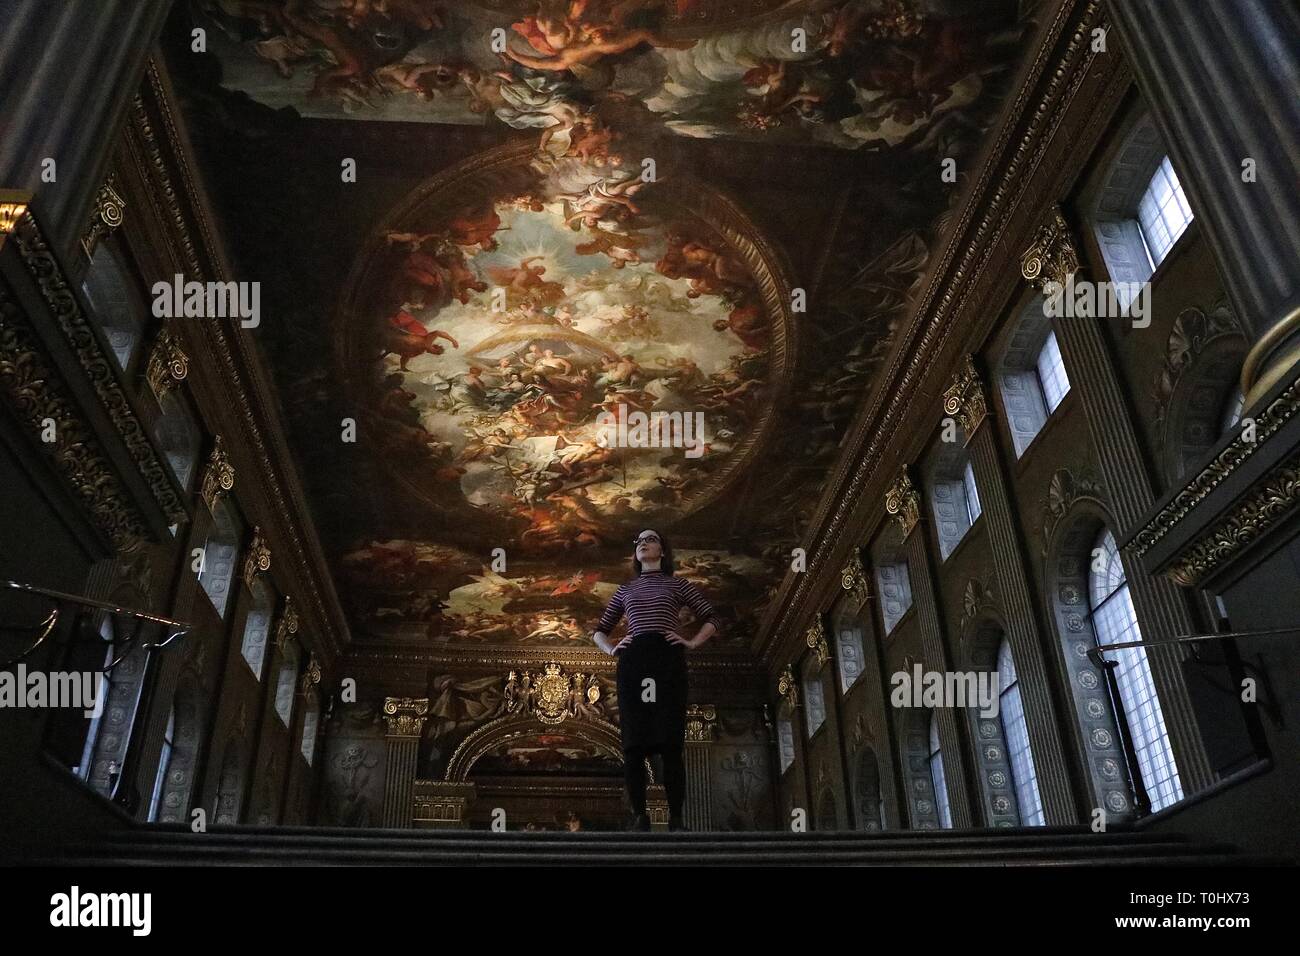 Old Royal Naval College Greenwich , le 22 mars 2019 Hall peint Banque D'Images